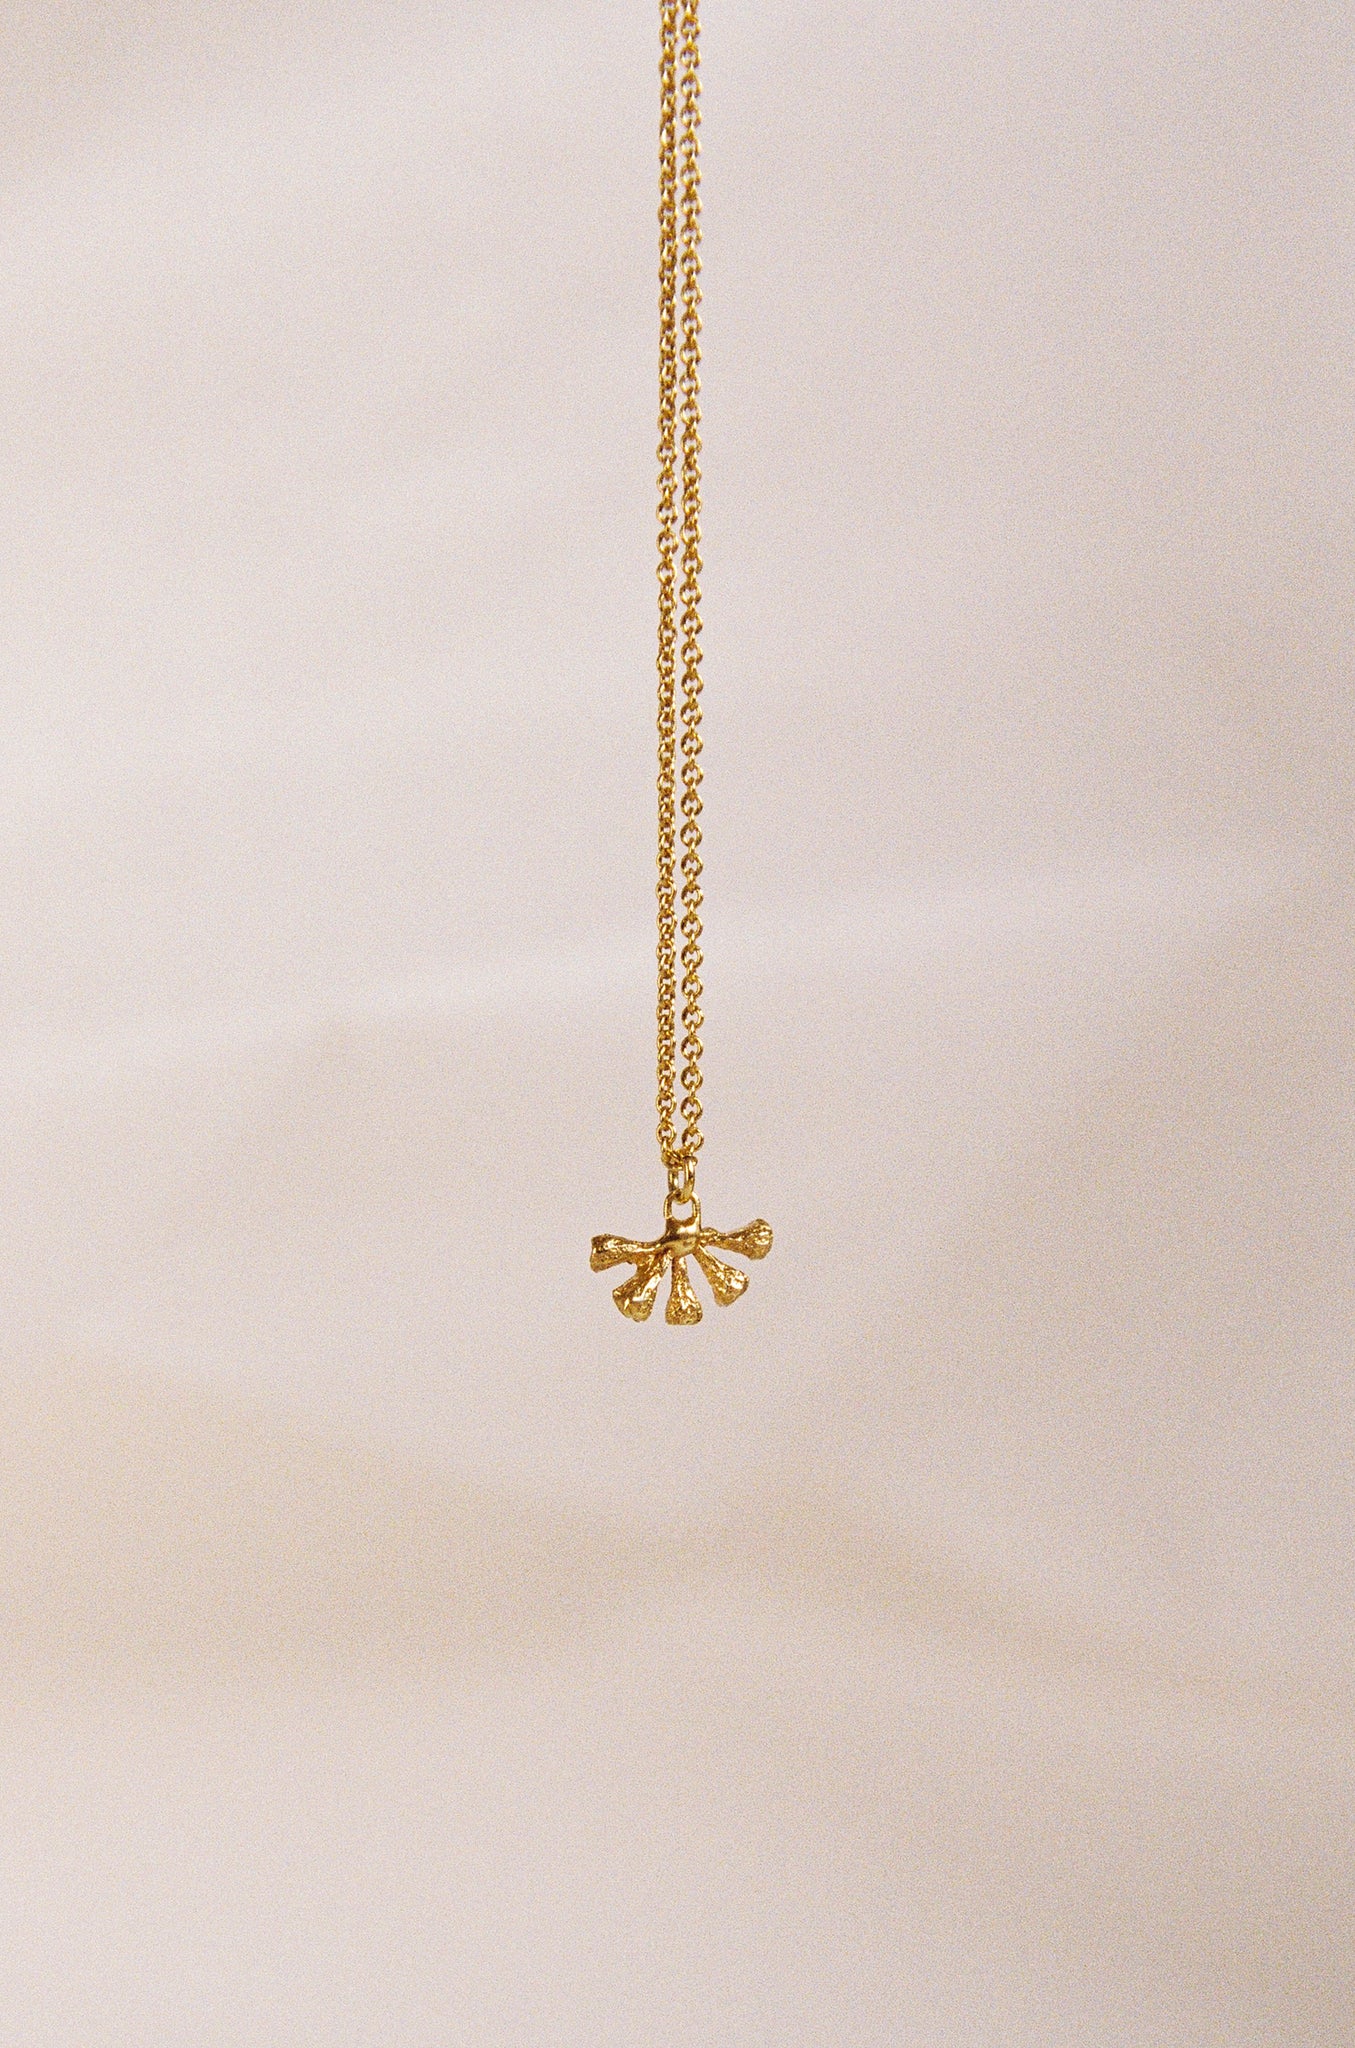 Alluvial Necklace - 9ct Yellow Gold